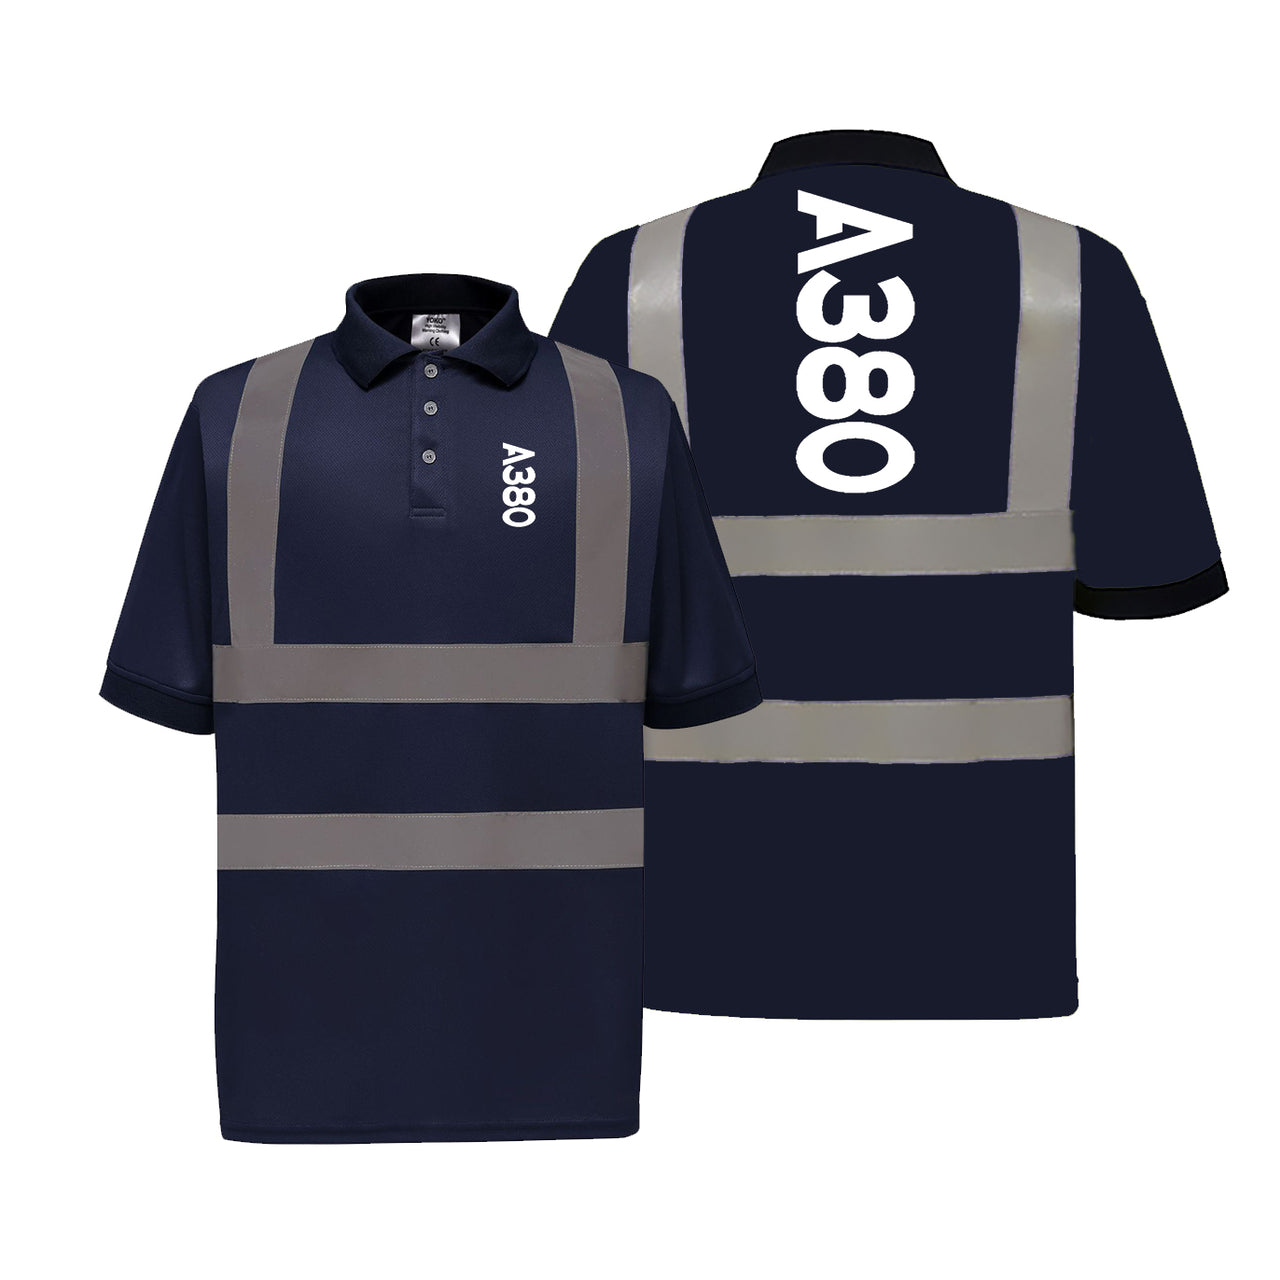 A380 Text Designed Reflective Polo T-Shirts